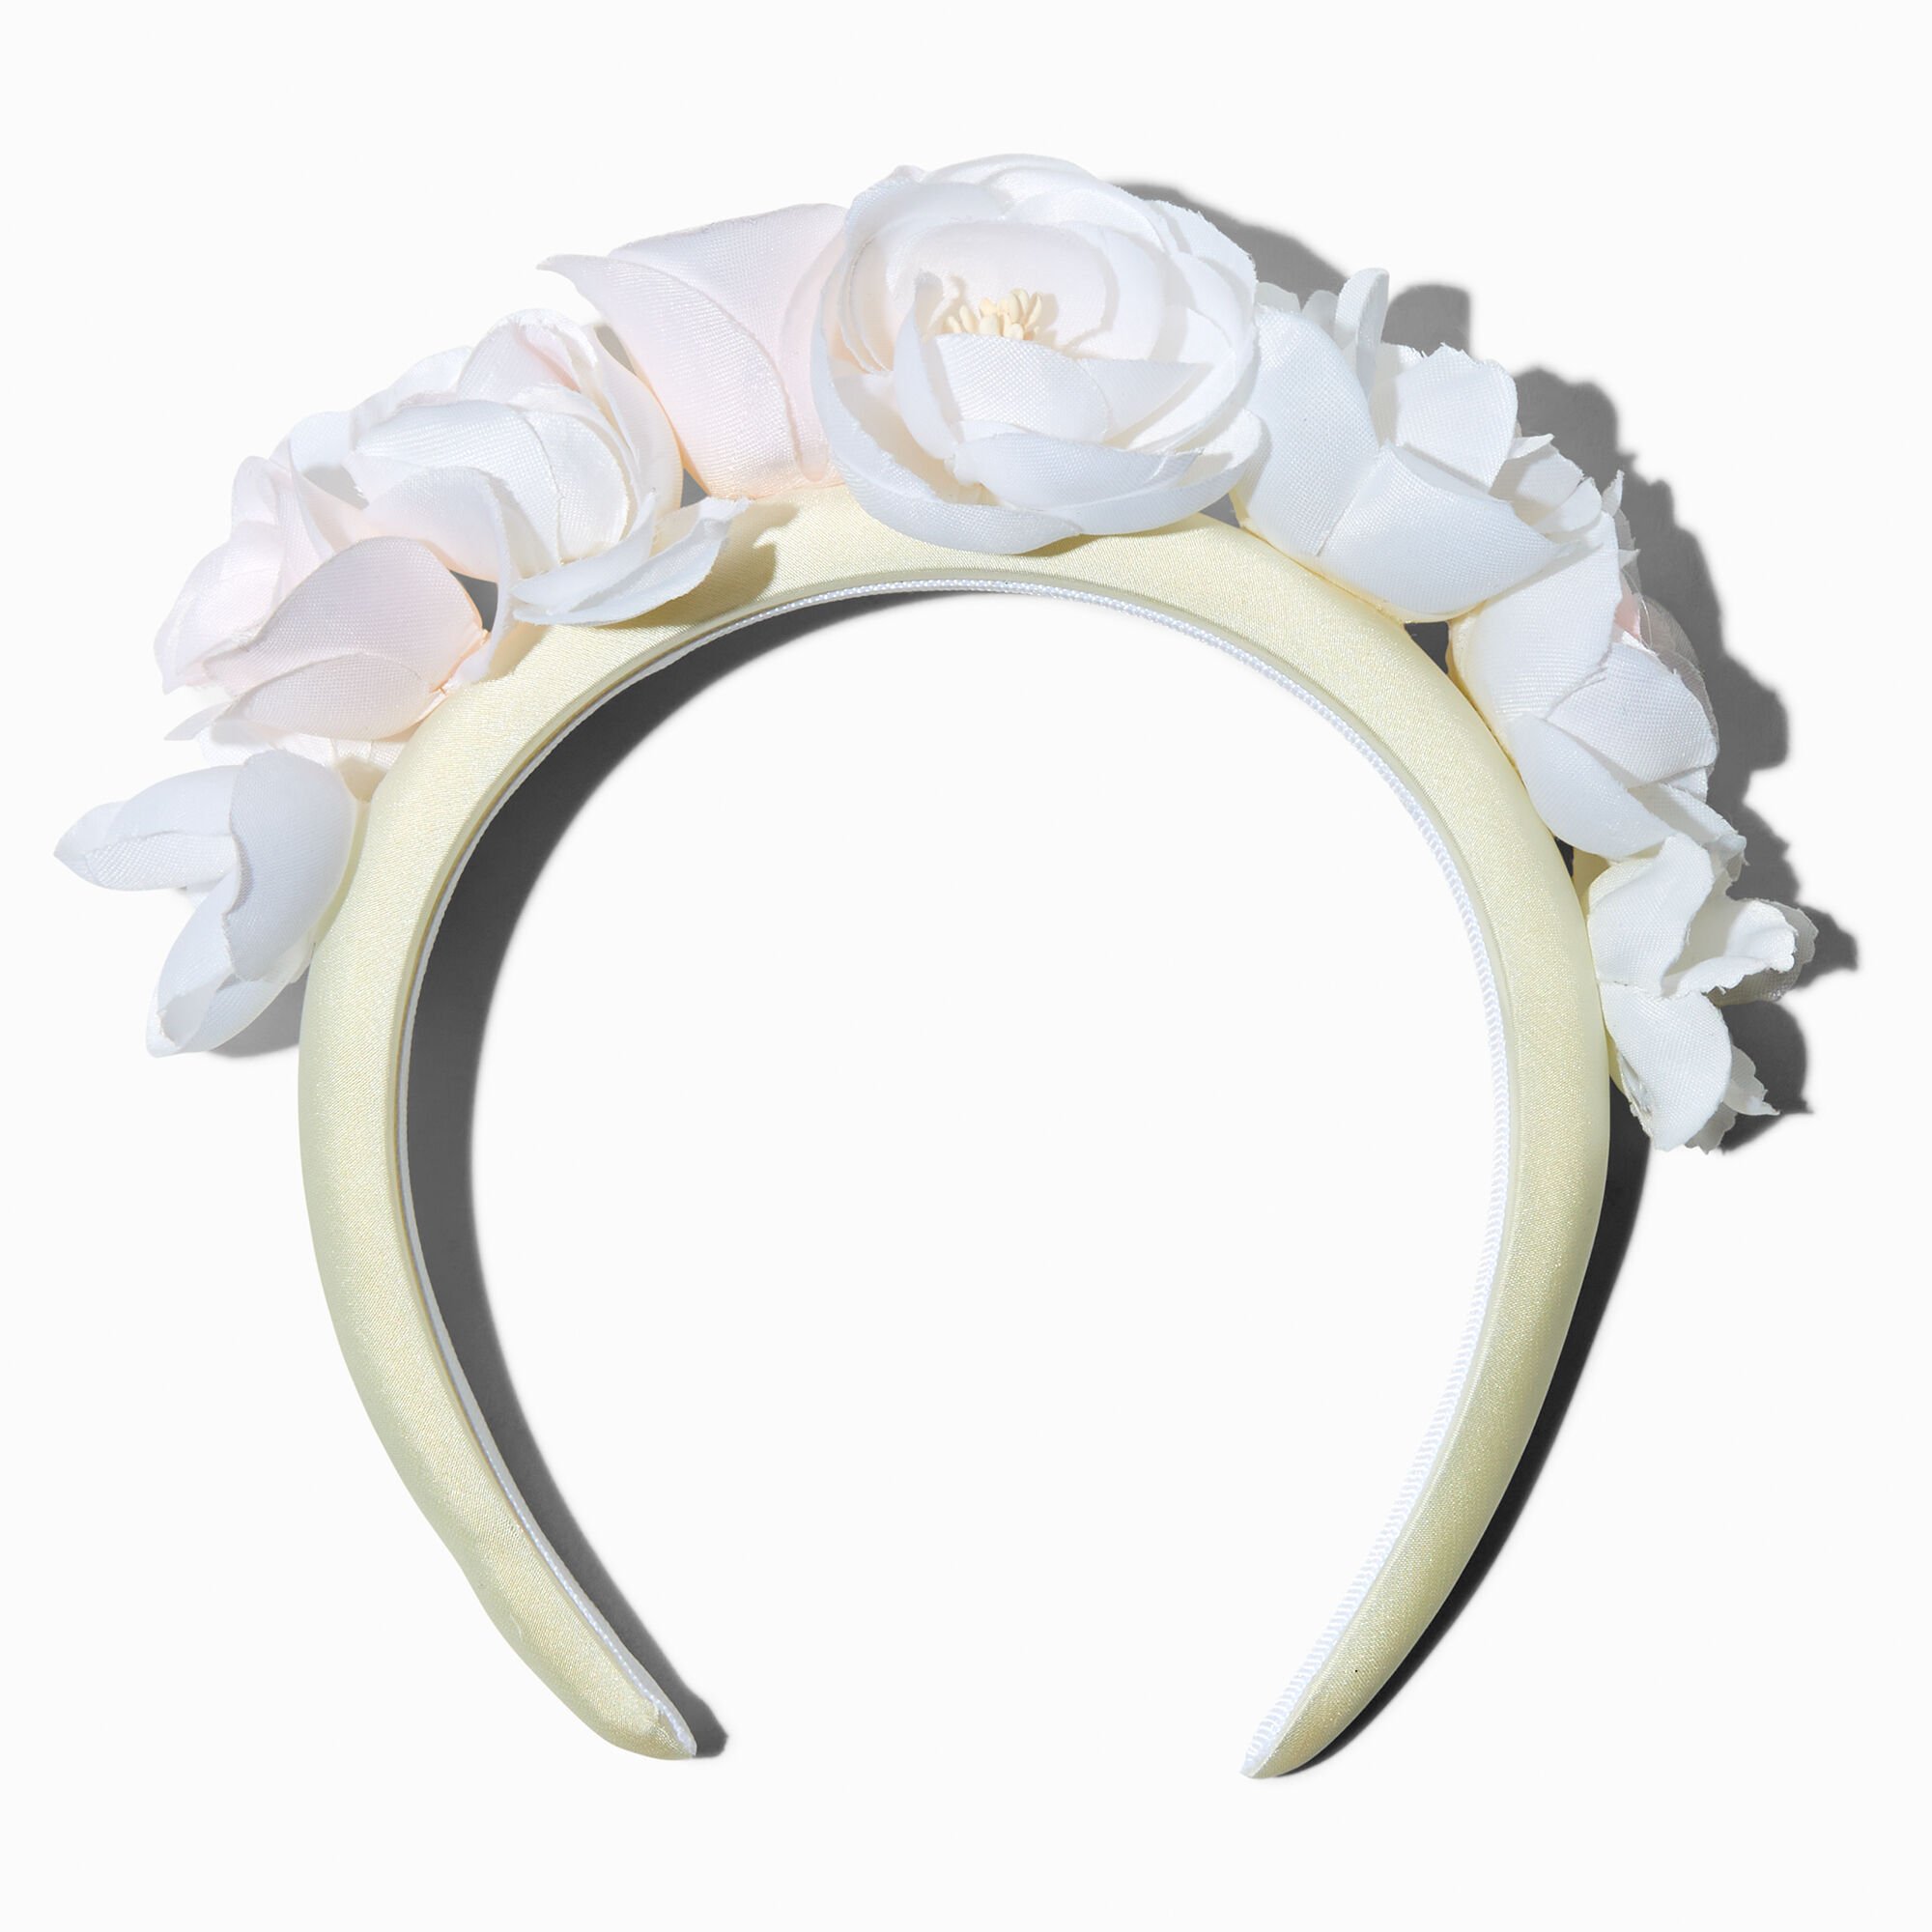 View Claires Rose Flower Crown Headband White information